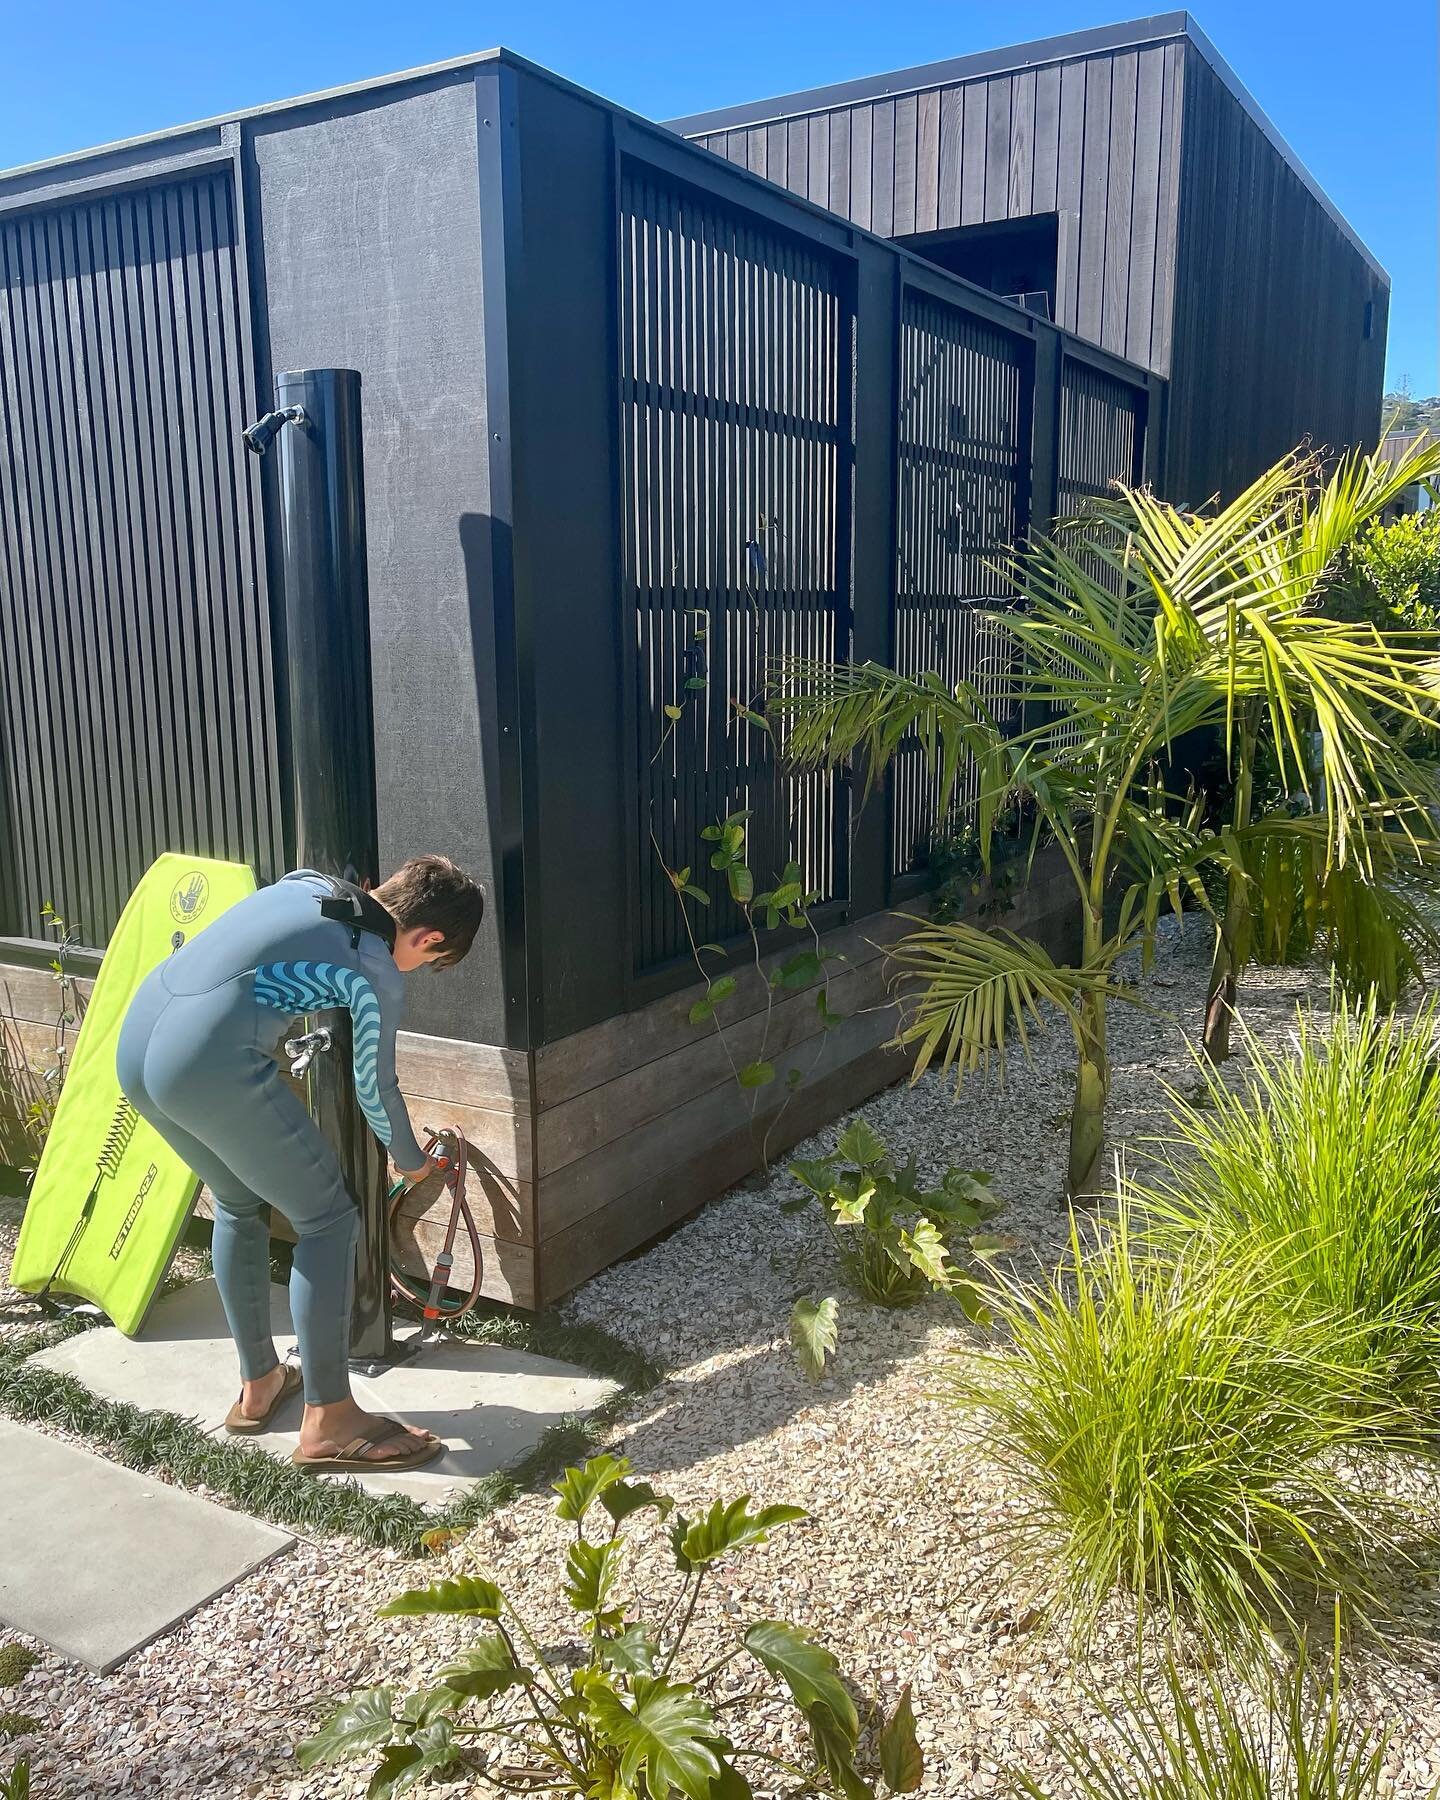 The sun is out ☀️and the surf 🏄&zwj;♀️ is up - less than 2 minutes walk ⏱ (in a wet suit 🤣) from Onetangi beach to our garden shower - more photos to come of our lovely new shell garden 🐚🌴💚💙 www.wavesong.nz